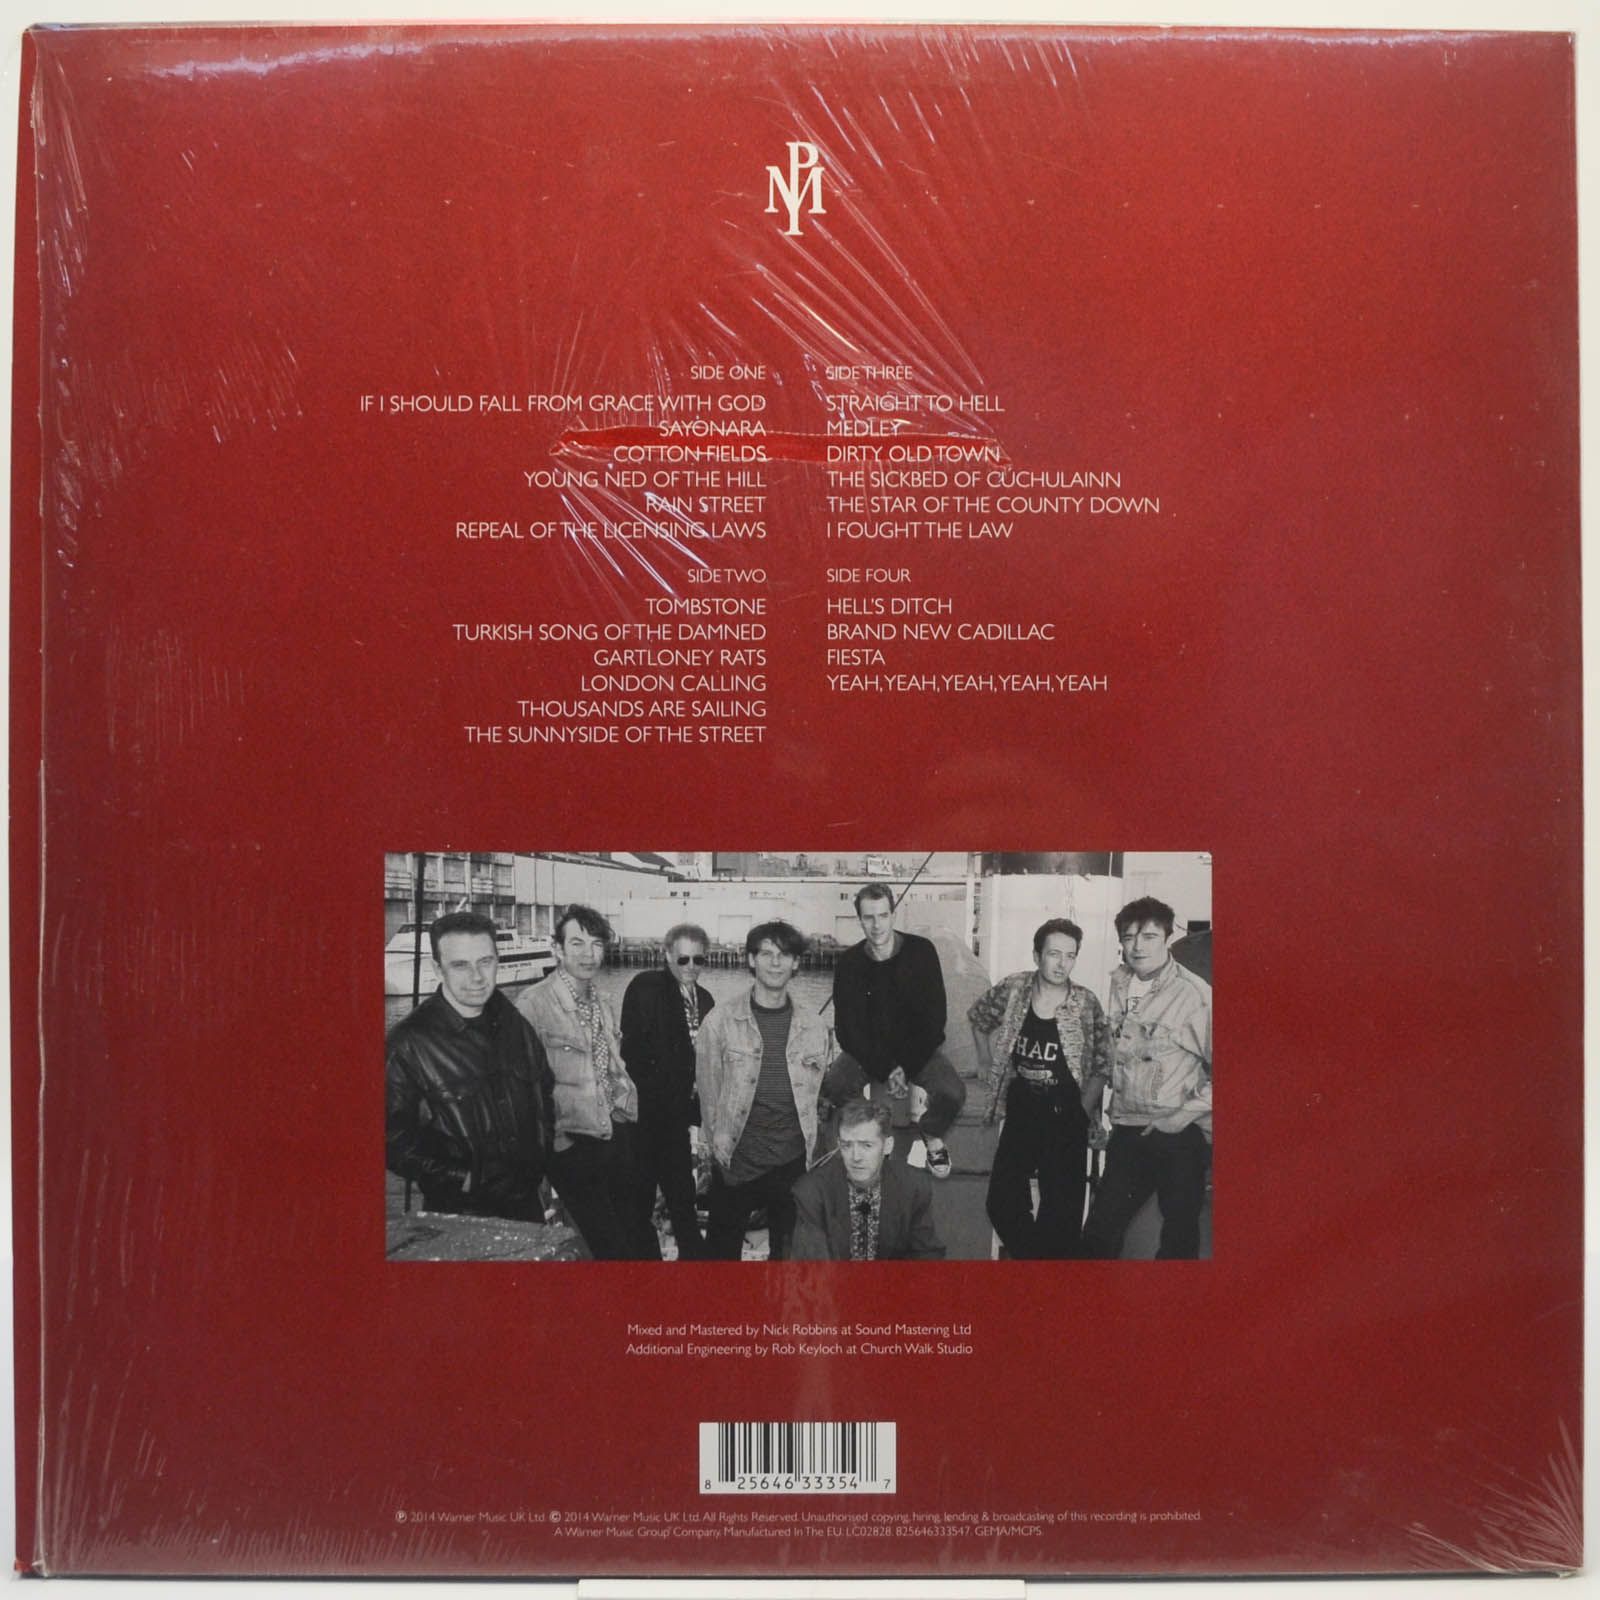 Pogues With Joe Strummer — Live In London (2LP), 2018